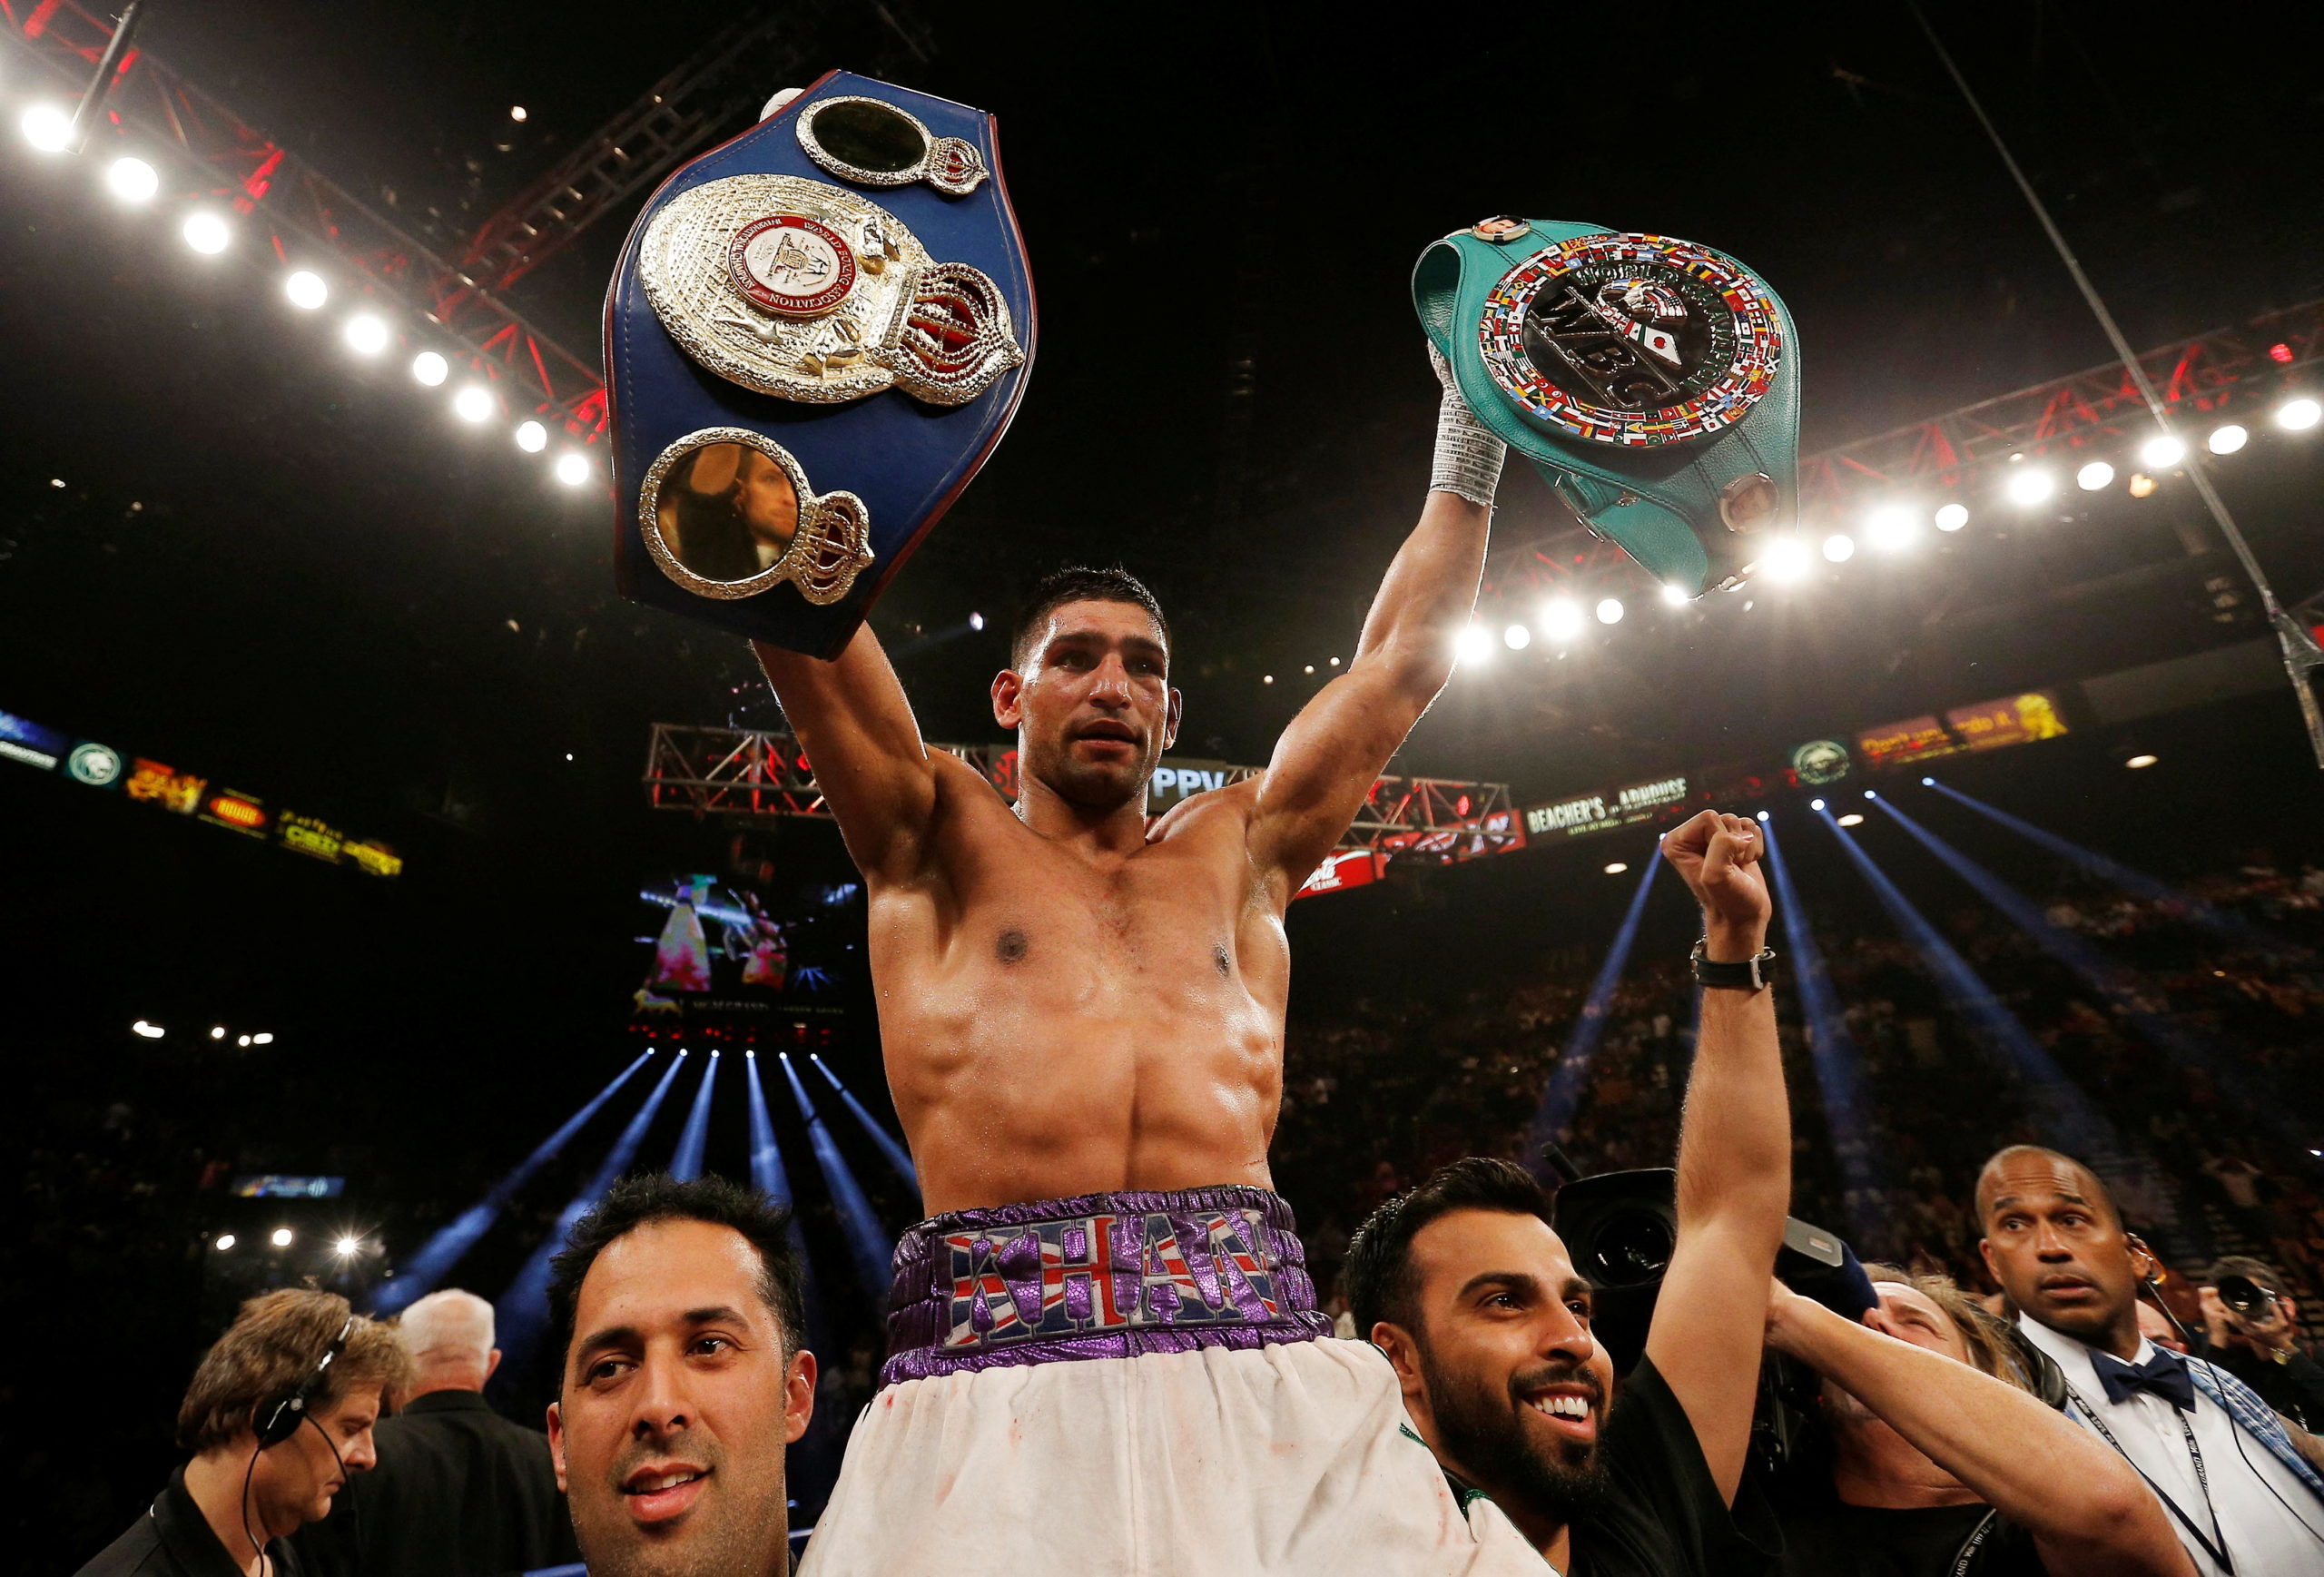 FILE PHOTO: Boxing - Luis Collazo v Amir Khan WBA International Welterweight Title - MGM Grand Garden Arena, Las Vegas, United States of America - 3/5/14   Amir Khan celebrates winning the fight with the title belts  